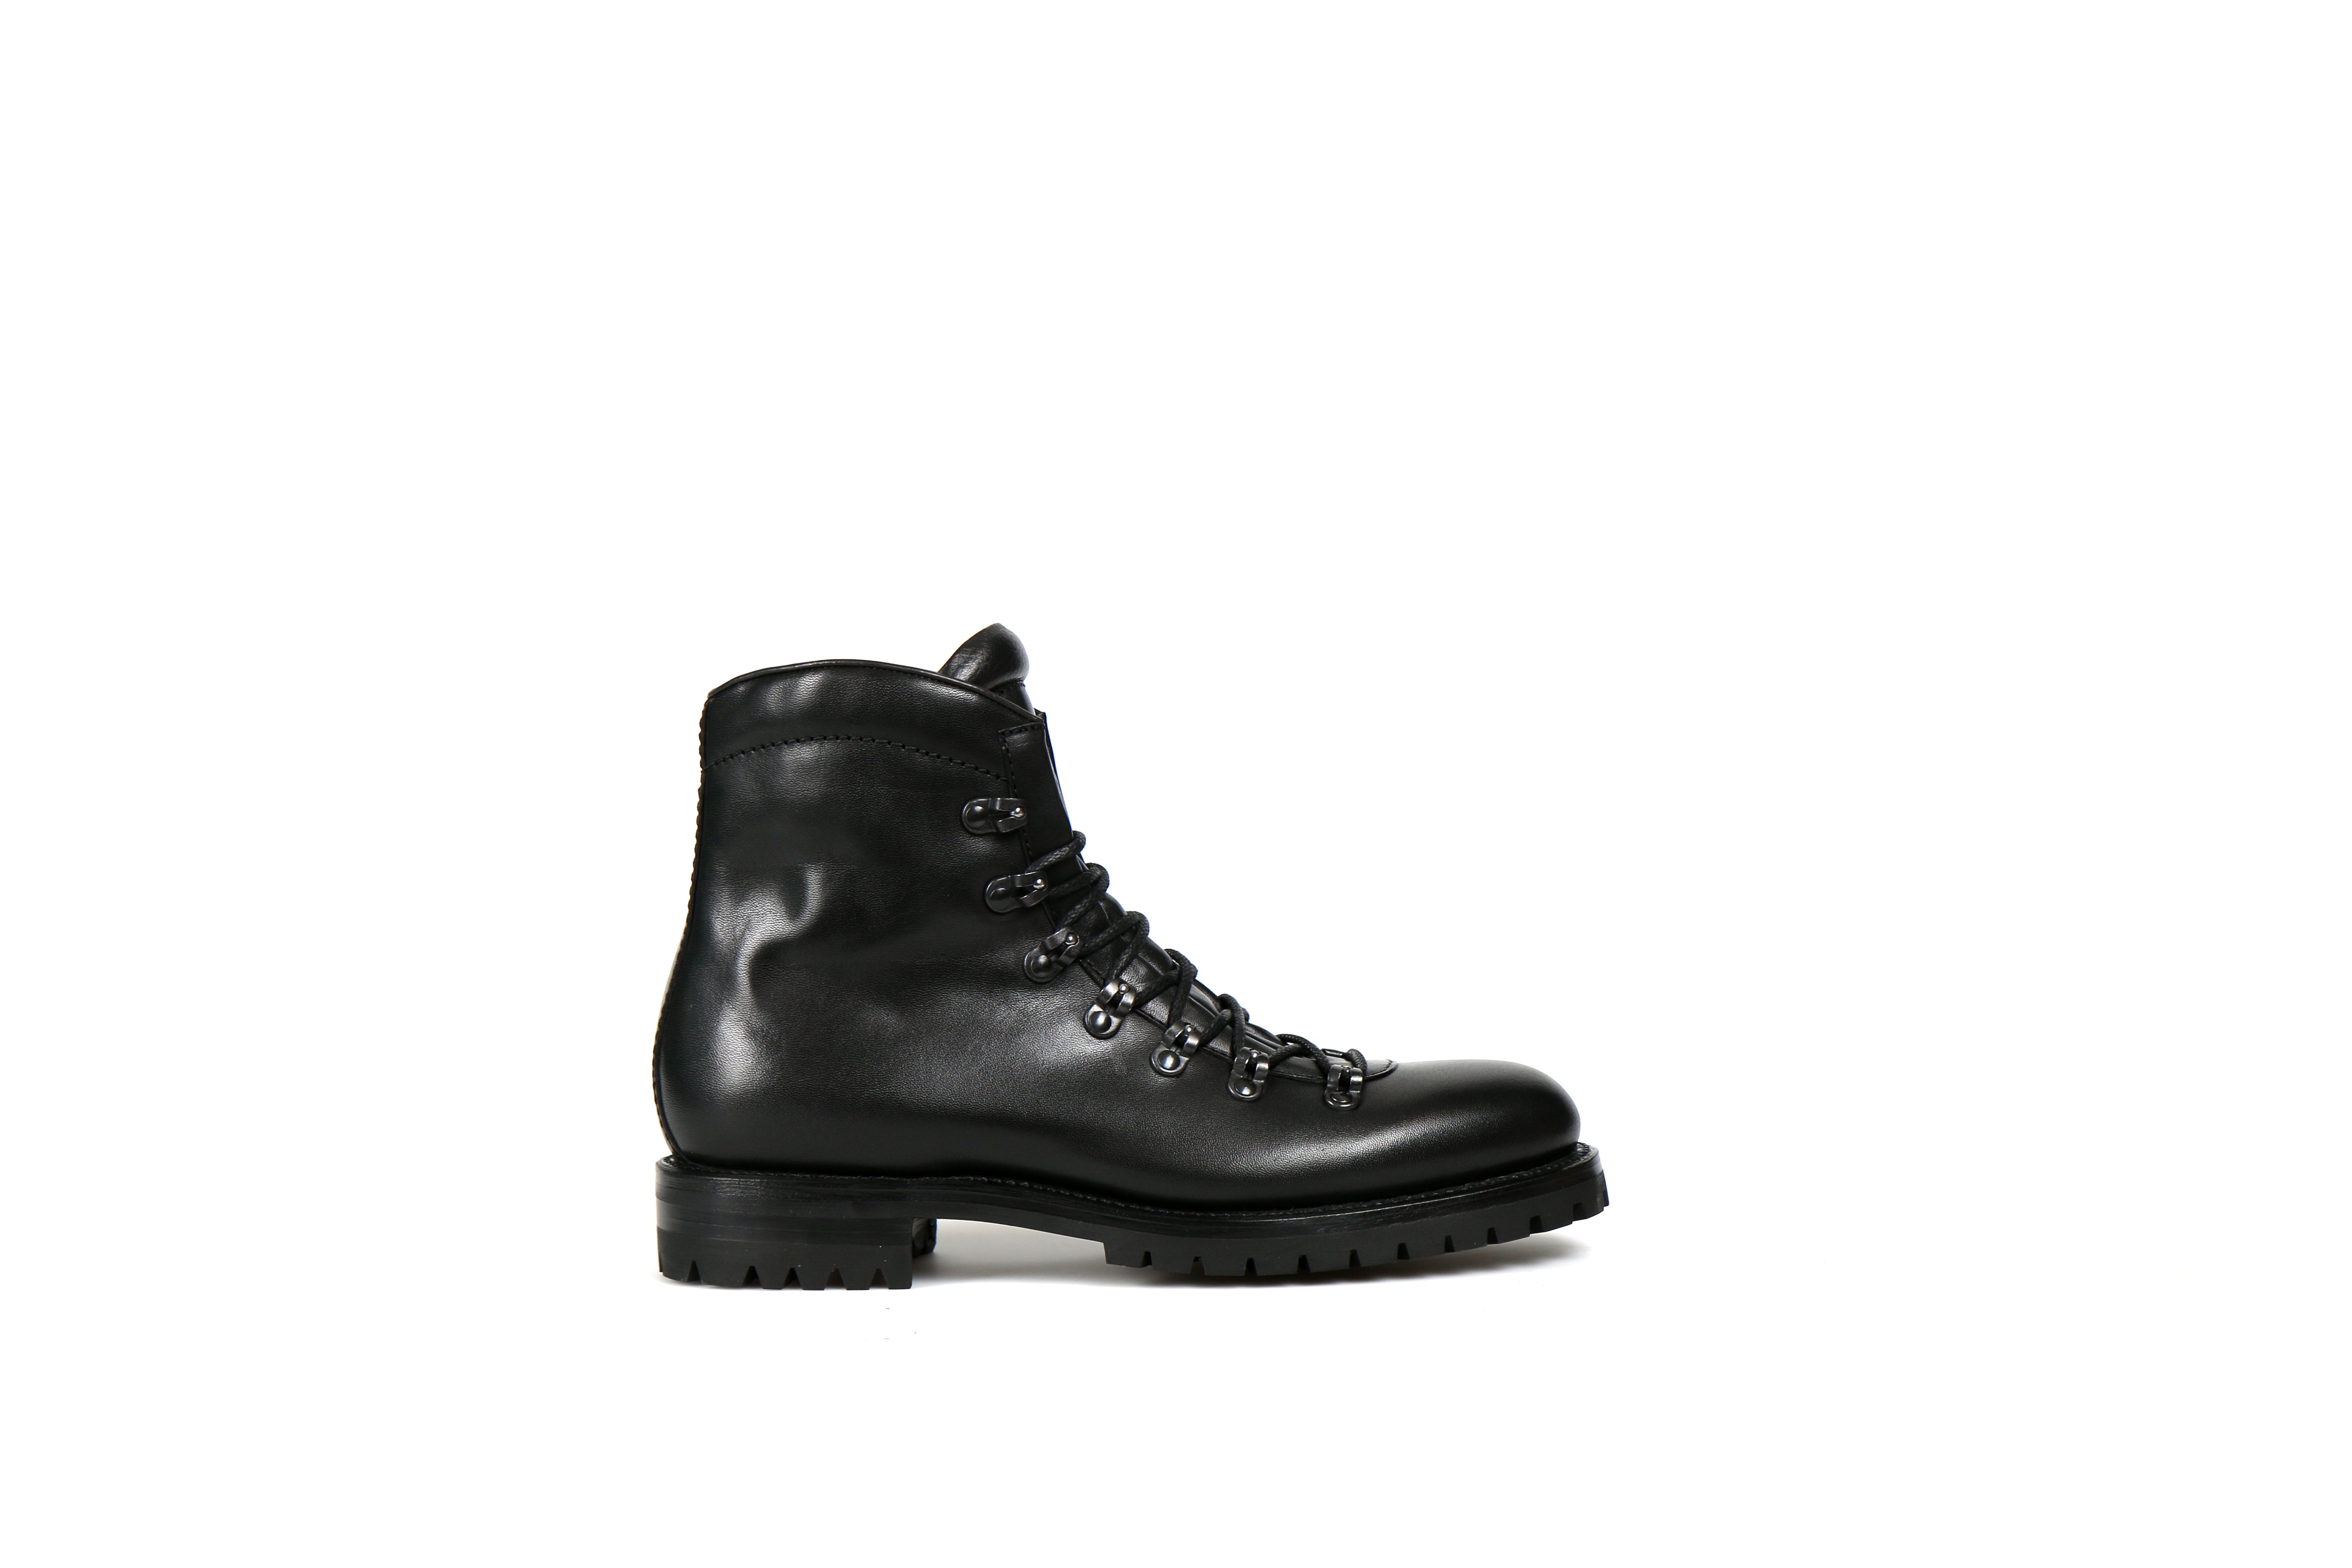 Kings Black Cordovan Leather Hiking Boots